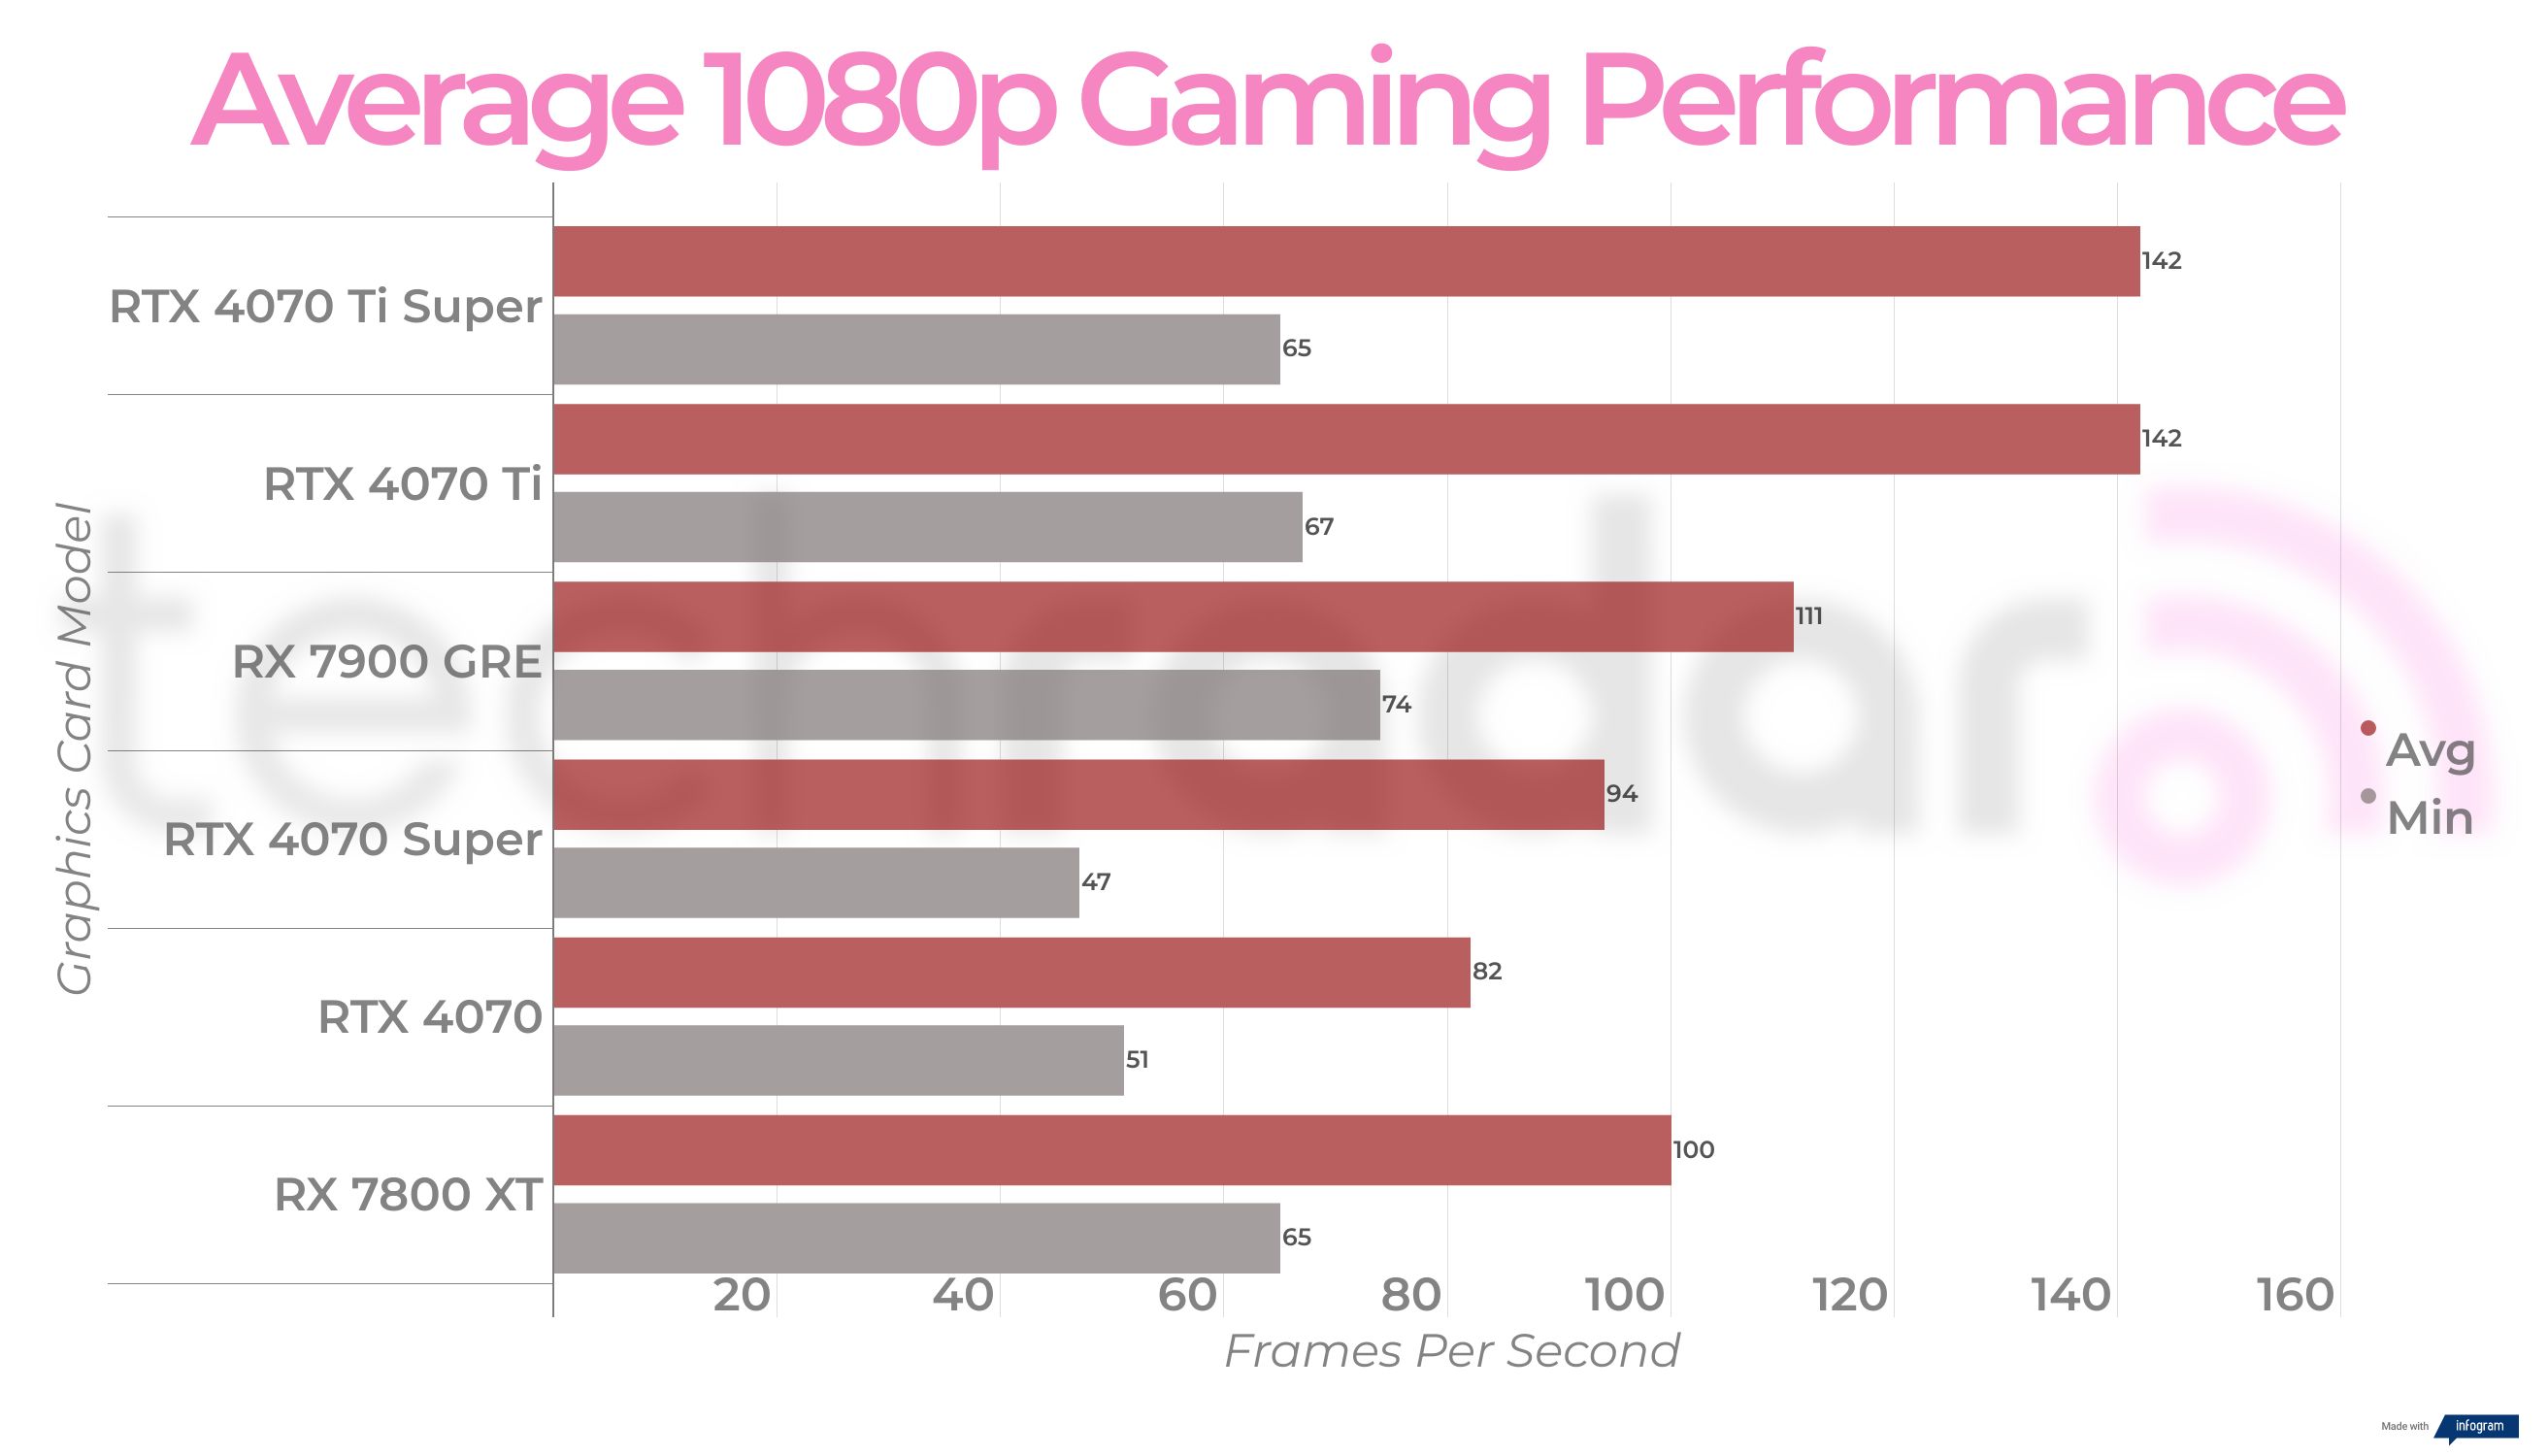 Final benchmark results for the RX 7900 GRE